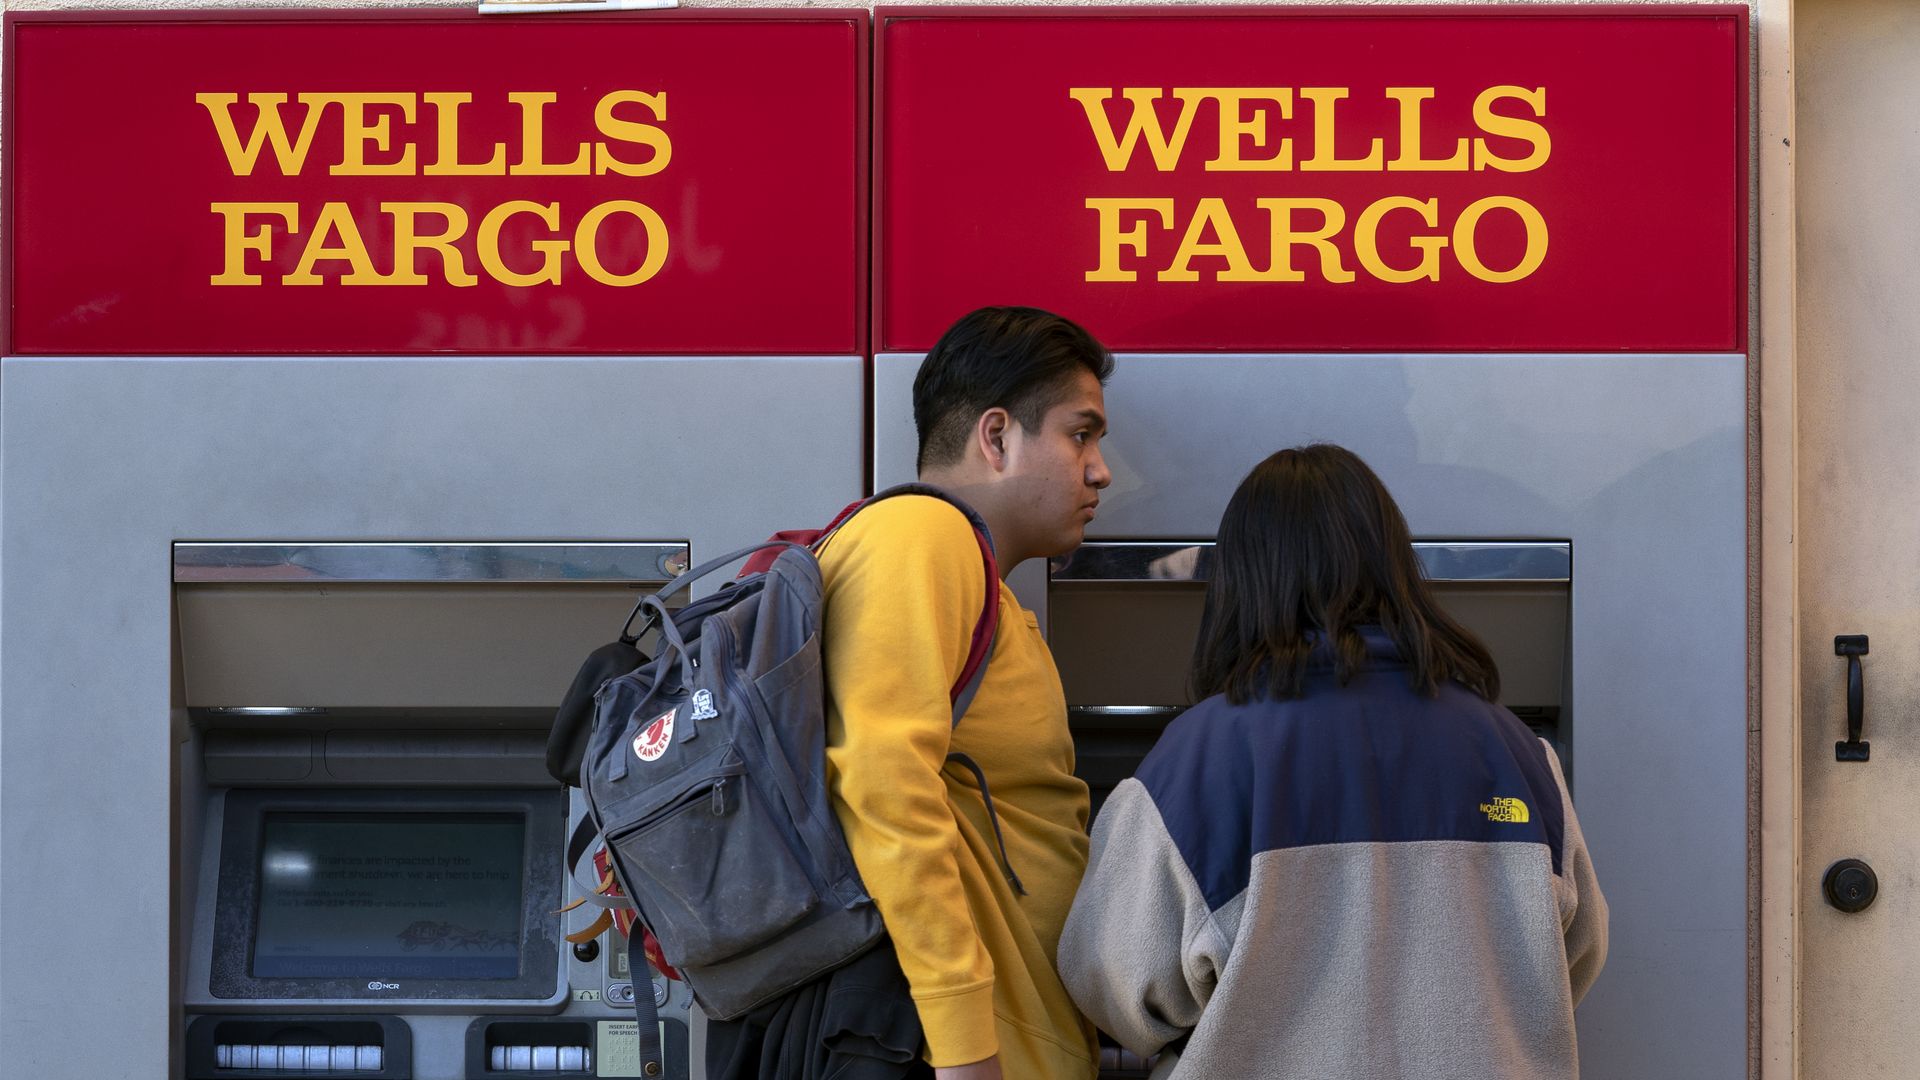 In this image, two people stand in front of a Wells Fargo ATM 